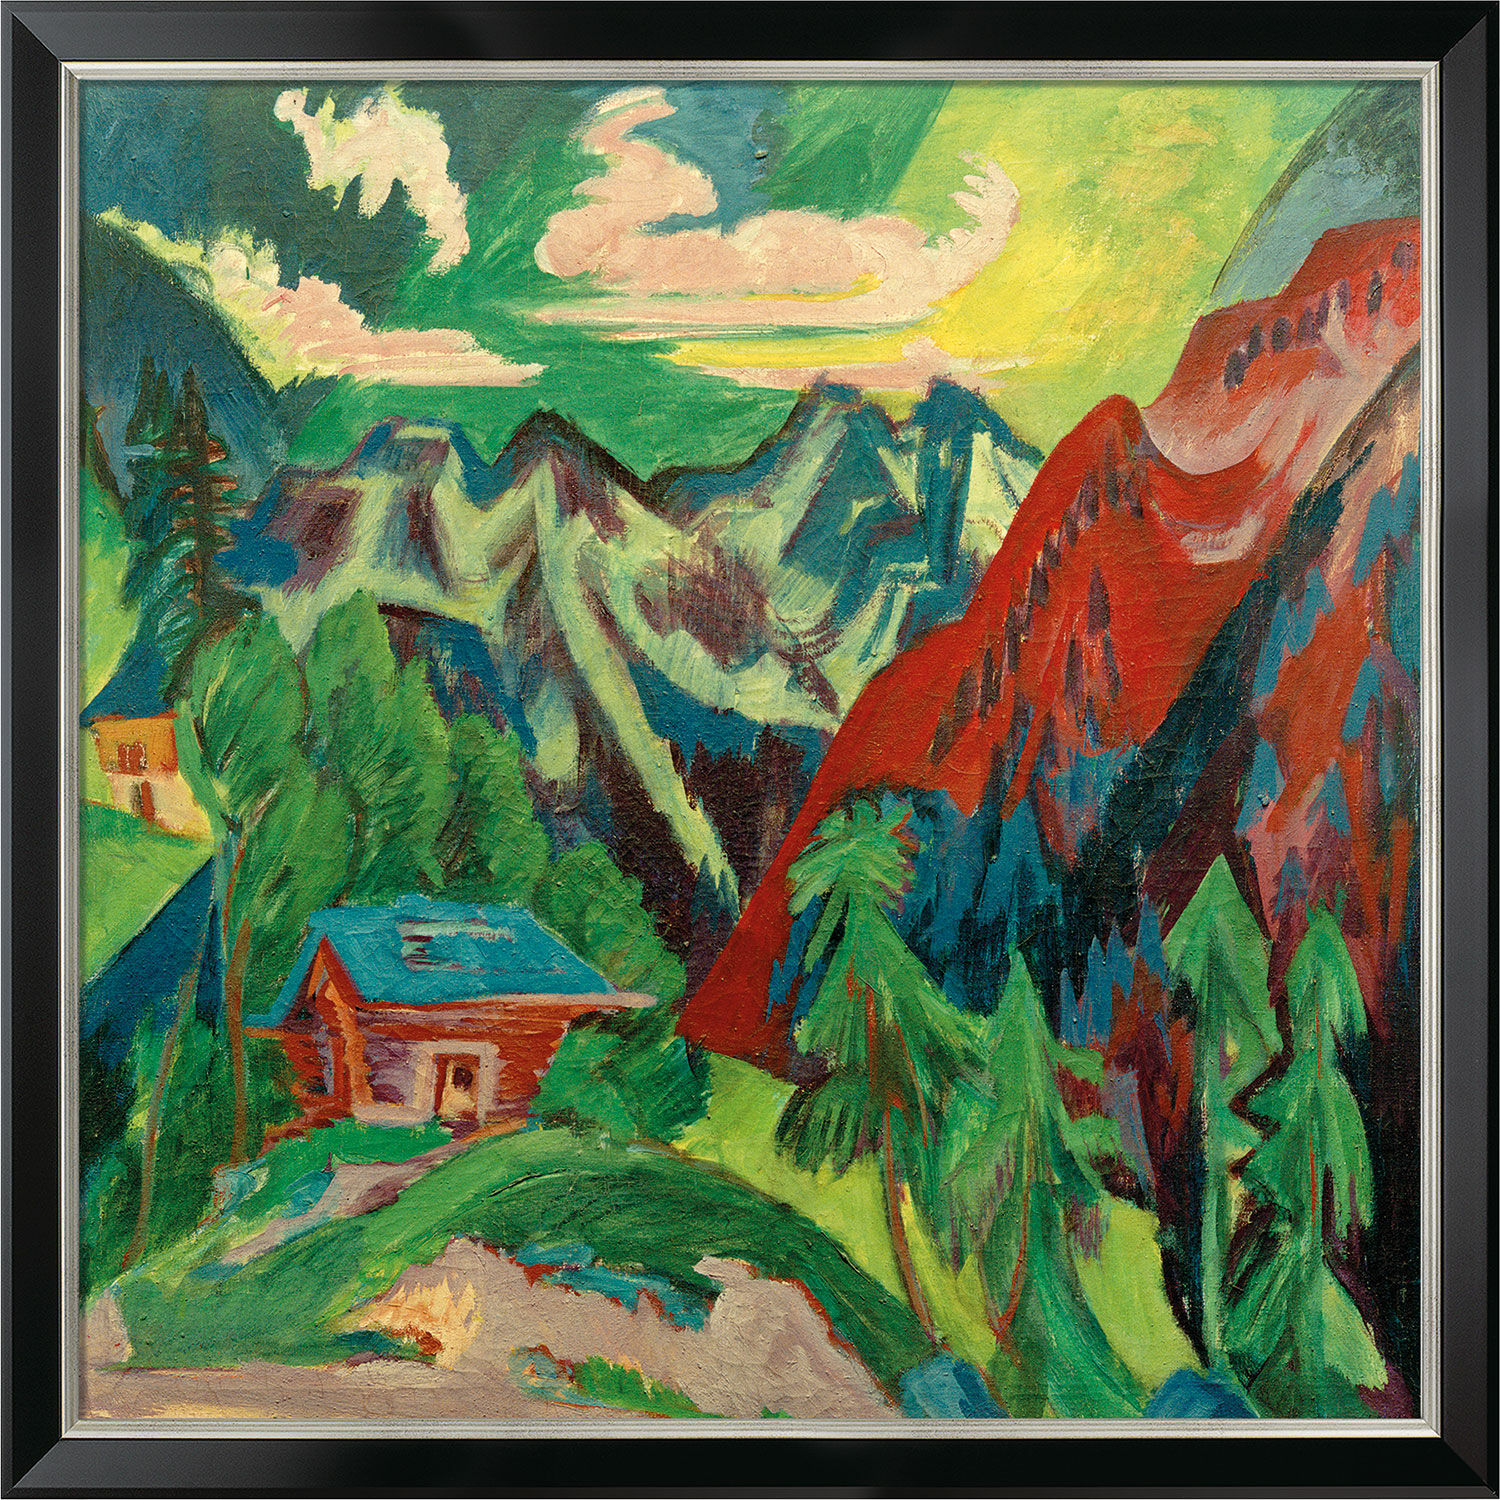 Picture "The Mountains of Klosters" (1923), framed by Ernst Ludwig Kirchner